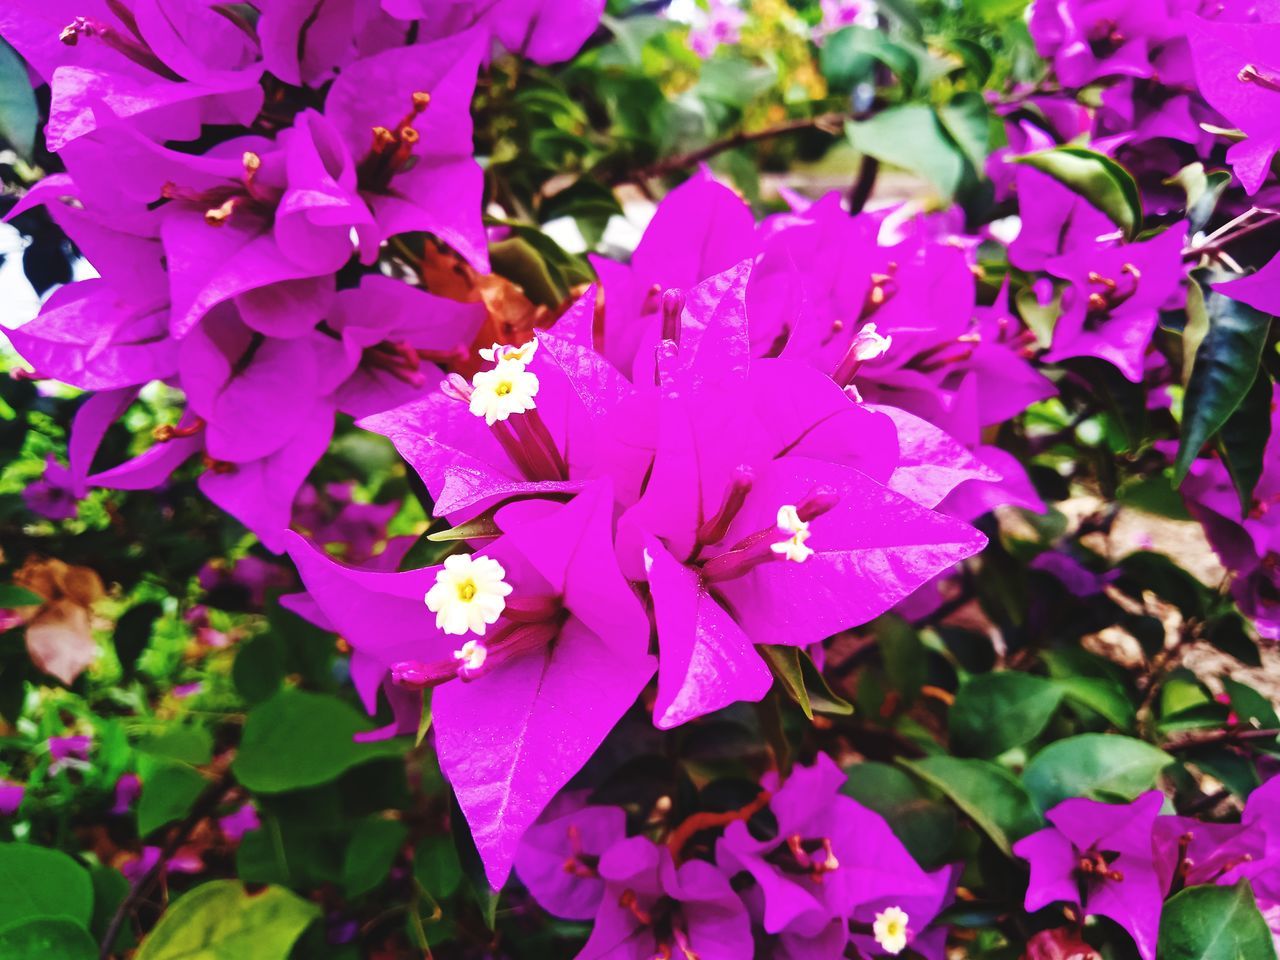 flower, flowering plant, plant, beauty in nature, freshness, petal, fragility, growth, pink, close-up, flower head, nature, inflorescence, no people, plant part, leaf, purple, day, shrub, bougainvillea, outdoors, blossom, focus on foreground, botany, springtime, wildflower